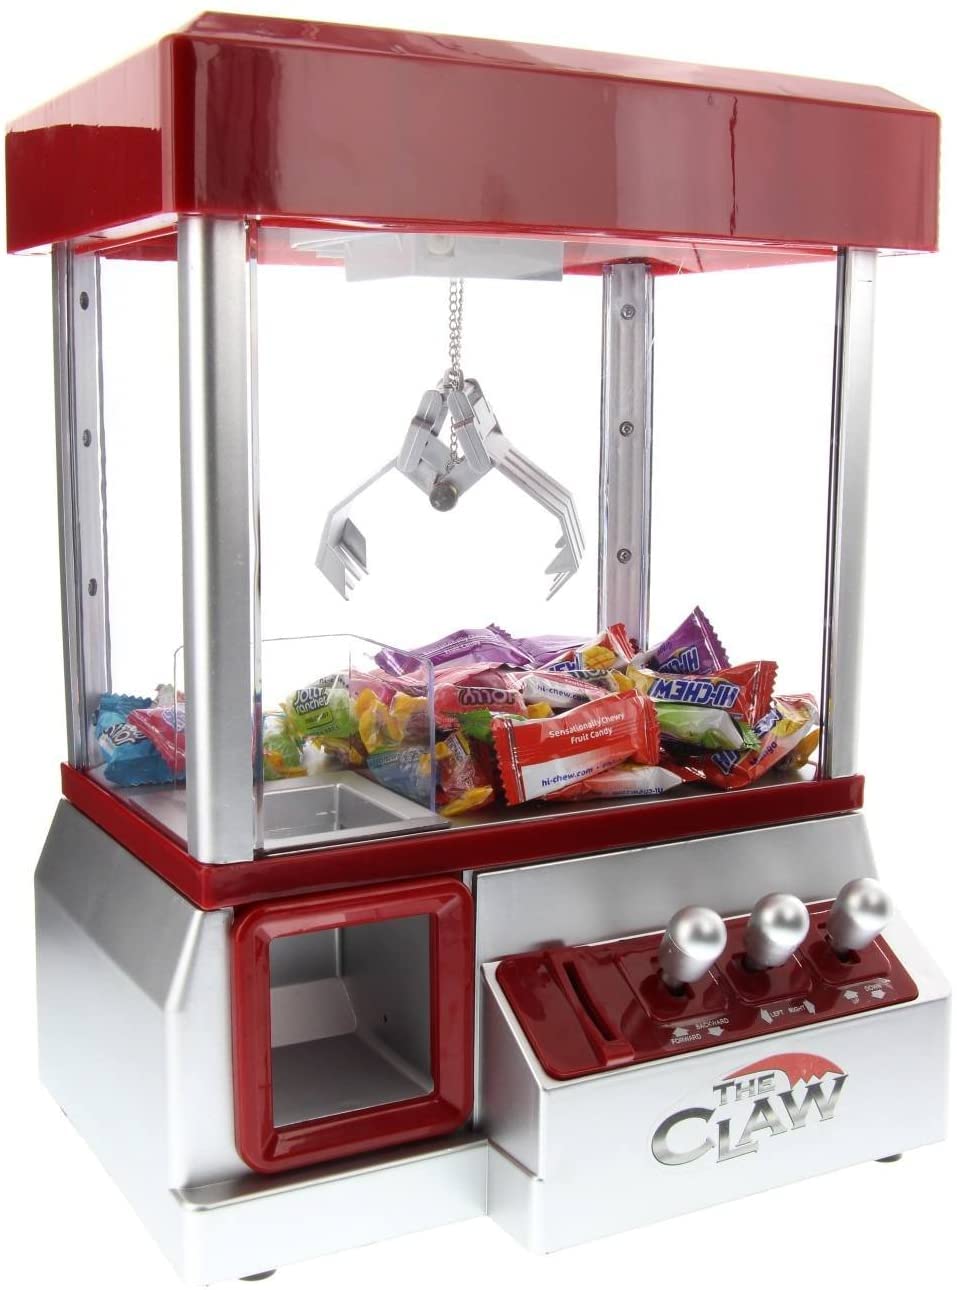 Mini Claw Machine For Kids – The Claw Toy Grabber Machine is Ideal for Children and Parties, Fill with Small Toys and Candy – Claw Machines Feature LED Lights, Loud Sound Effects and Coins